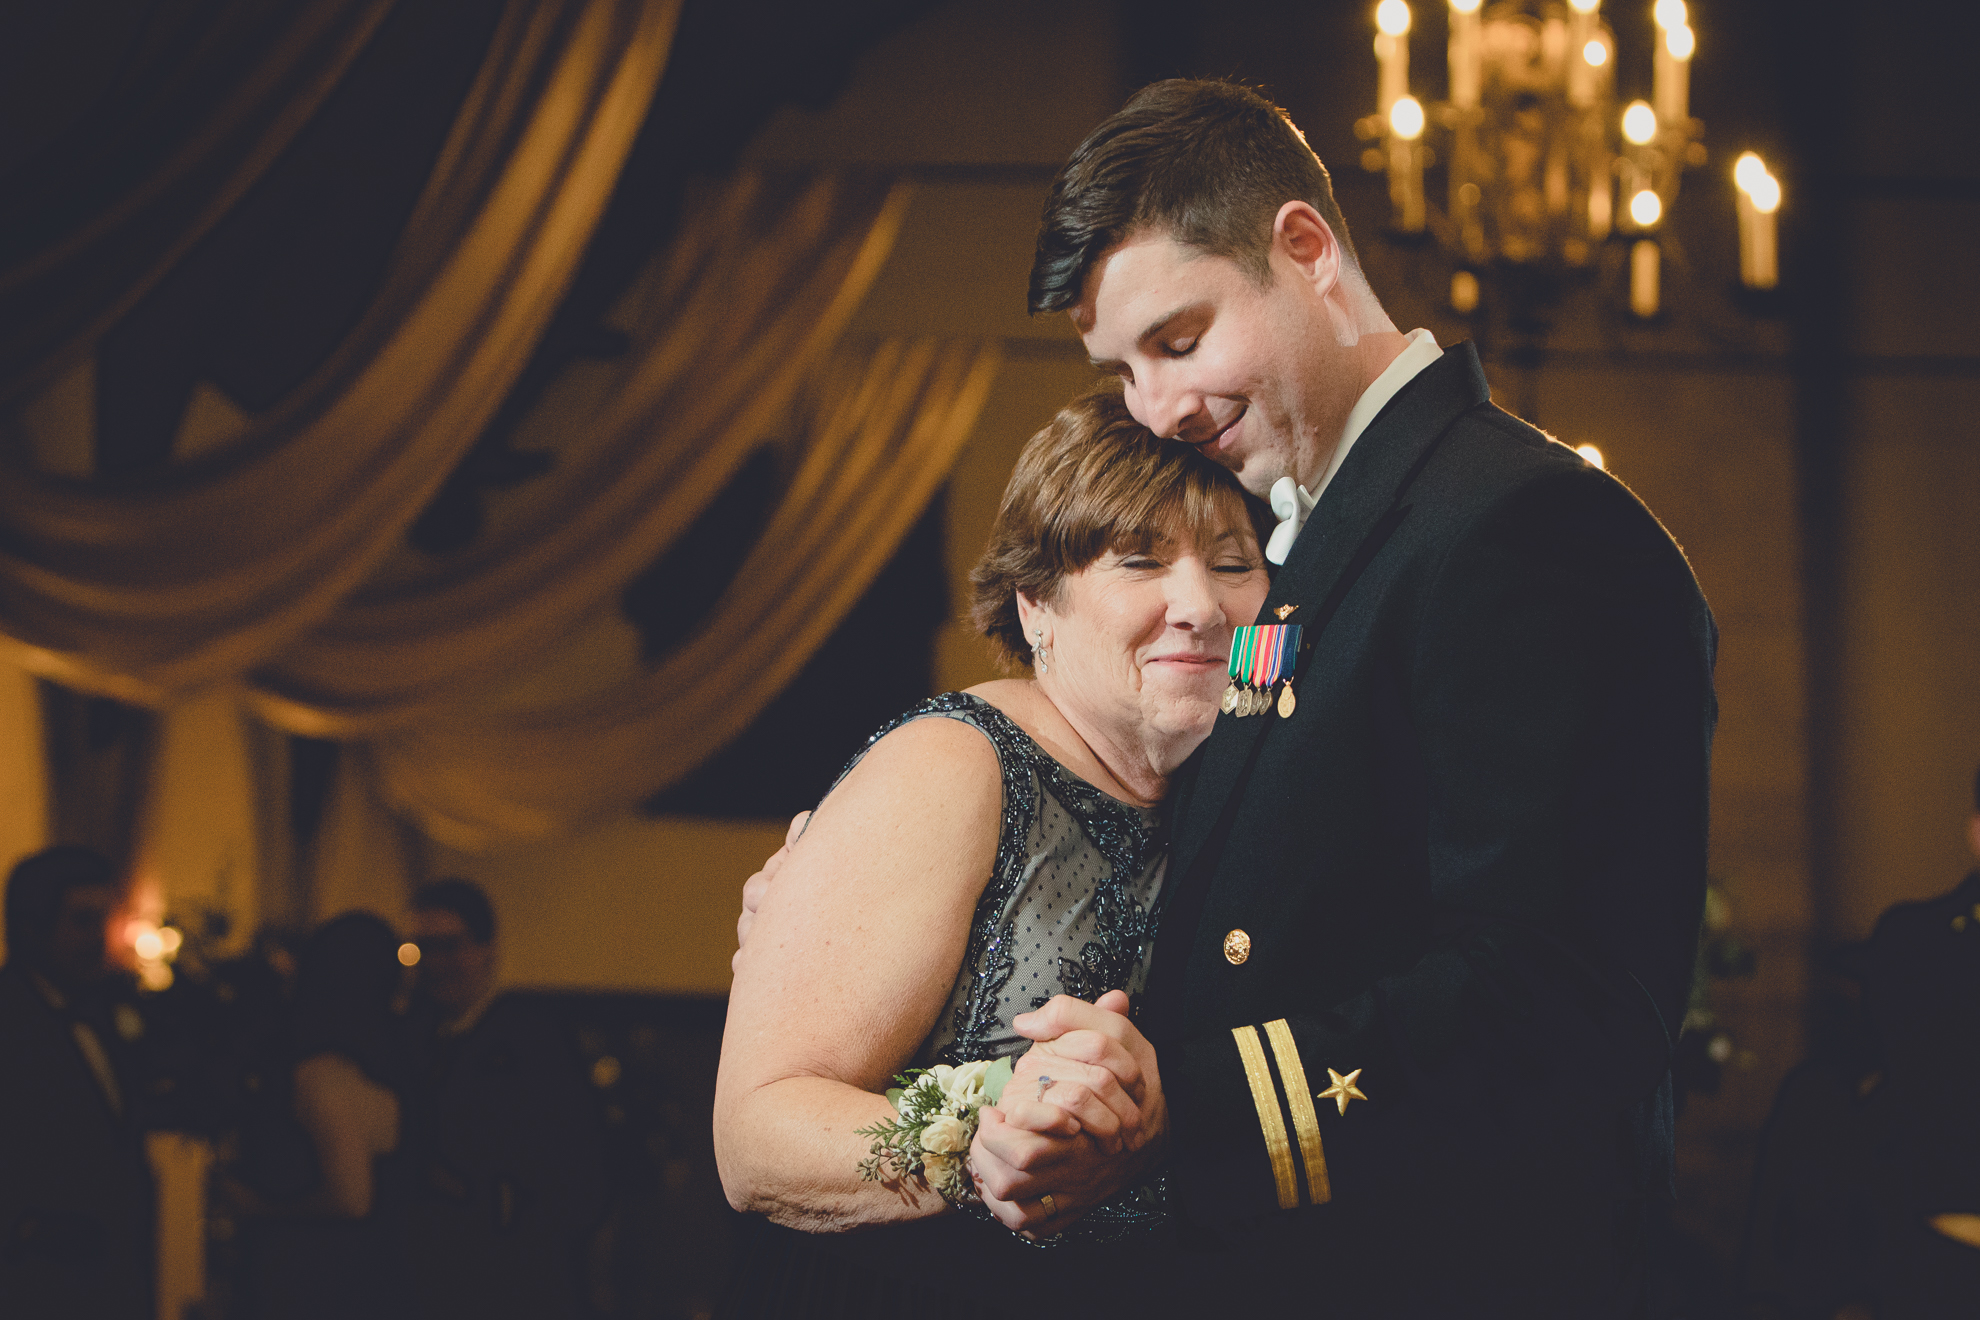 Mom cries while hugging groom during first dance at wedding reception at the Park Country Club in Buffalo, NY